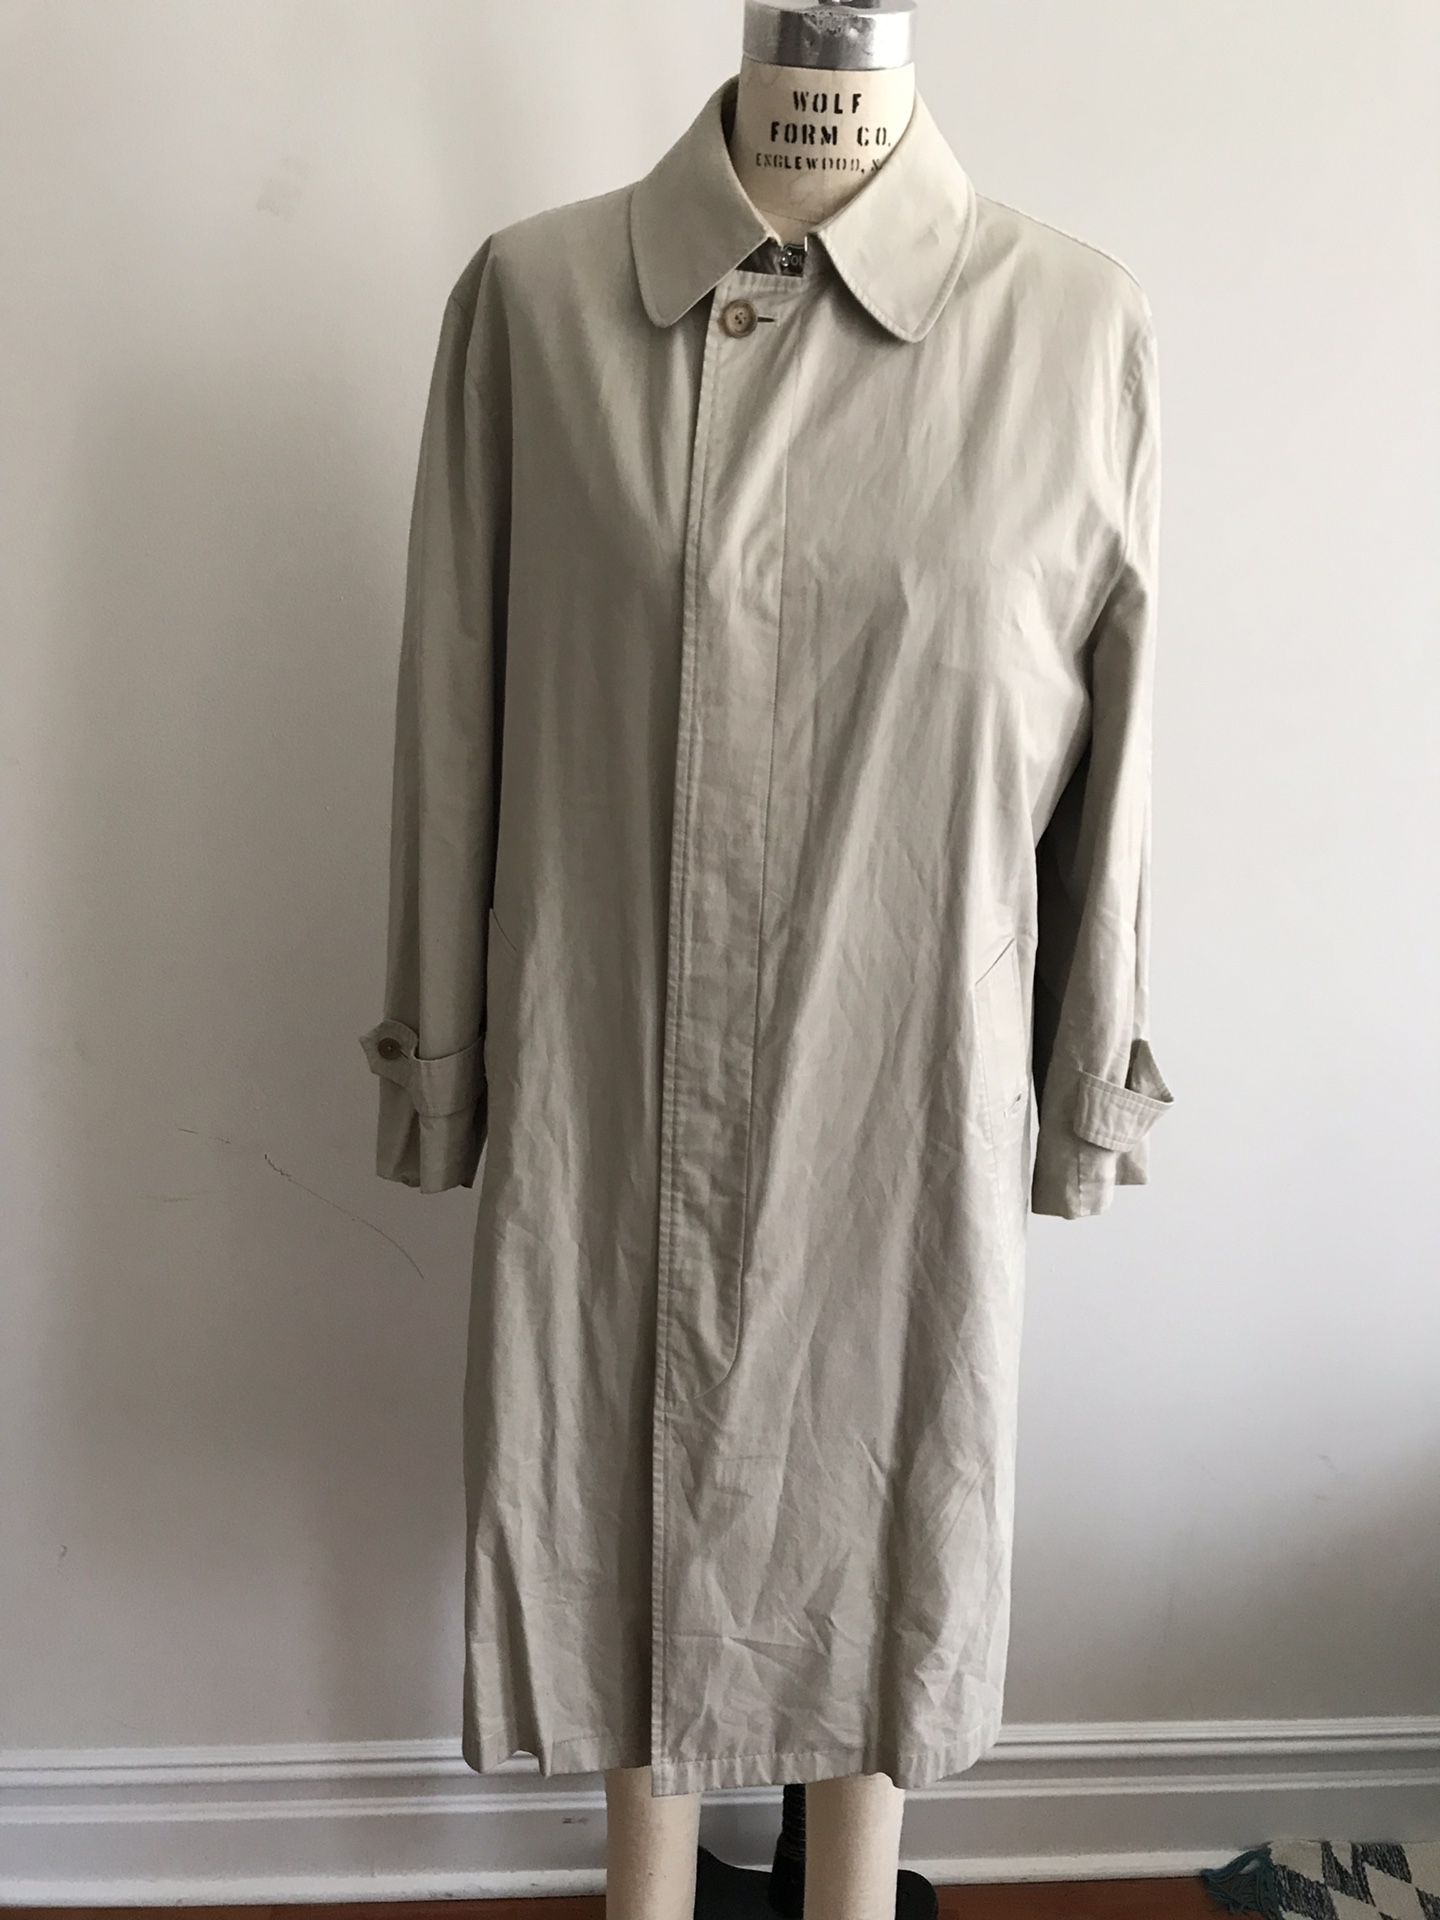 Burberry Women’s Tan Double Breasted Trench Coat Jacket Size 8 Made In ENGLAND. Condition is Pre-owned. See pictures ask questions and make an offer!